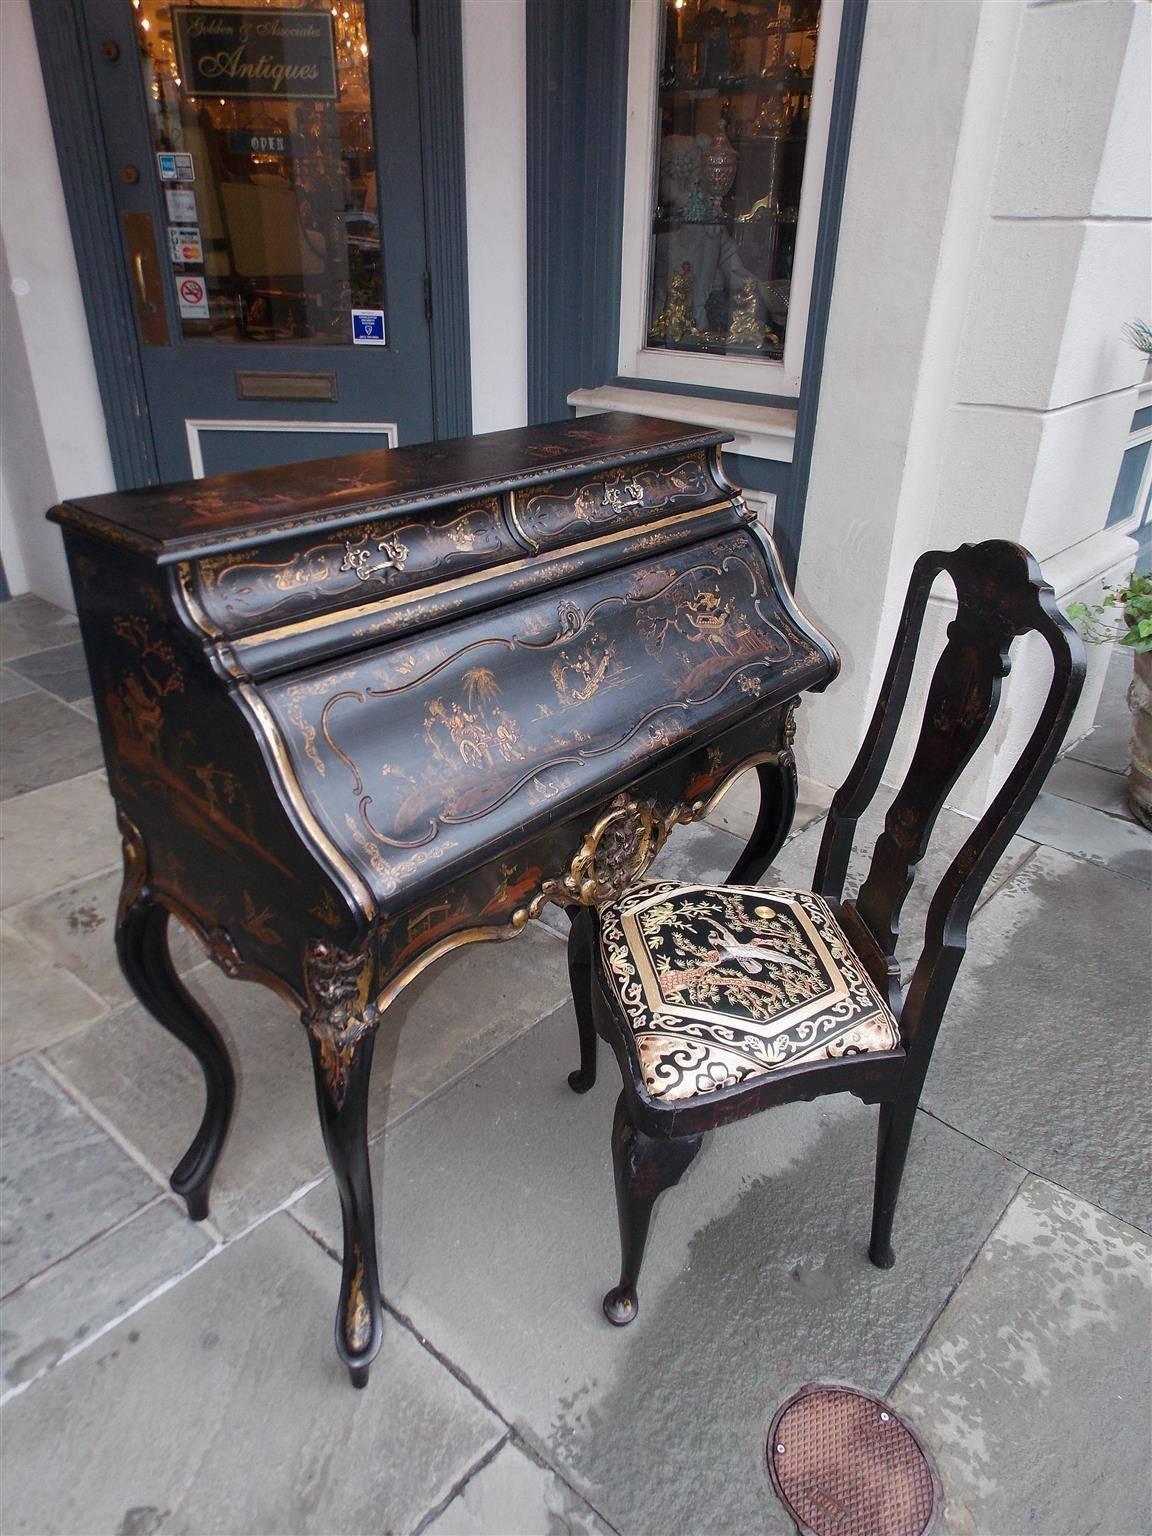 English Chinoiserie black lacquered and gilt fall front writing desk with figural landscape scenes, two upper case drawers, fitted interior, leather writing surface, centered gilt carved floral cartouche, and is terminating on the original